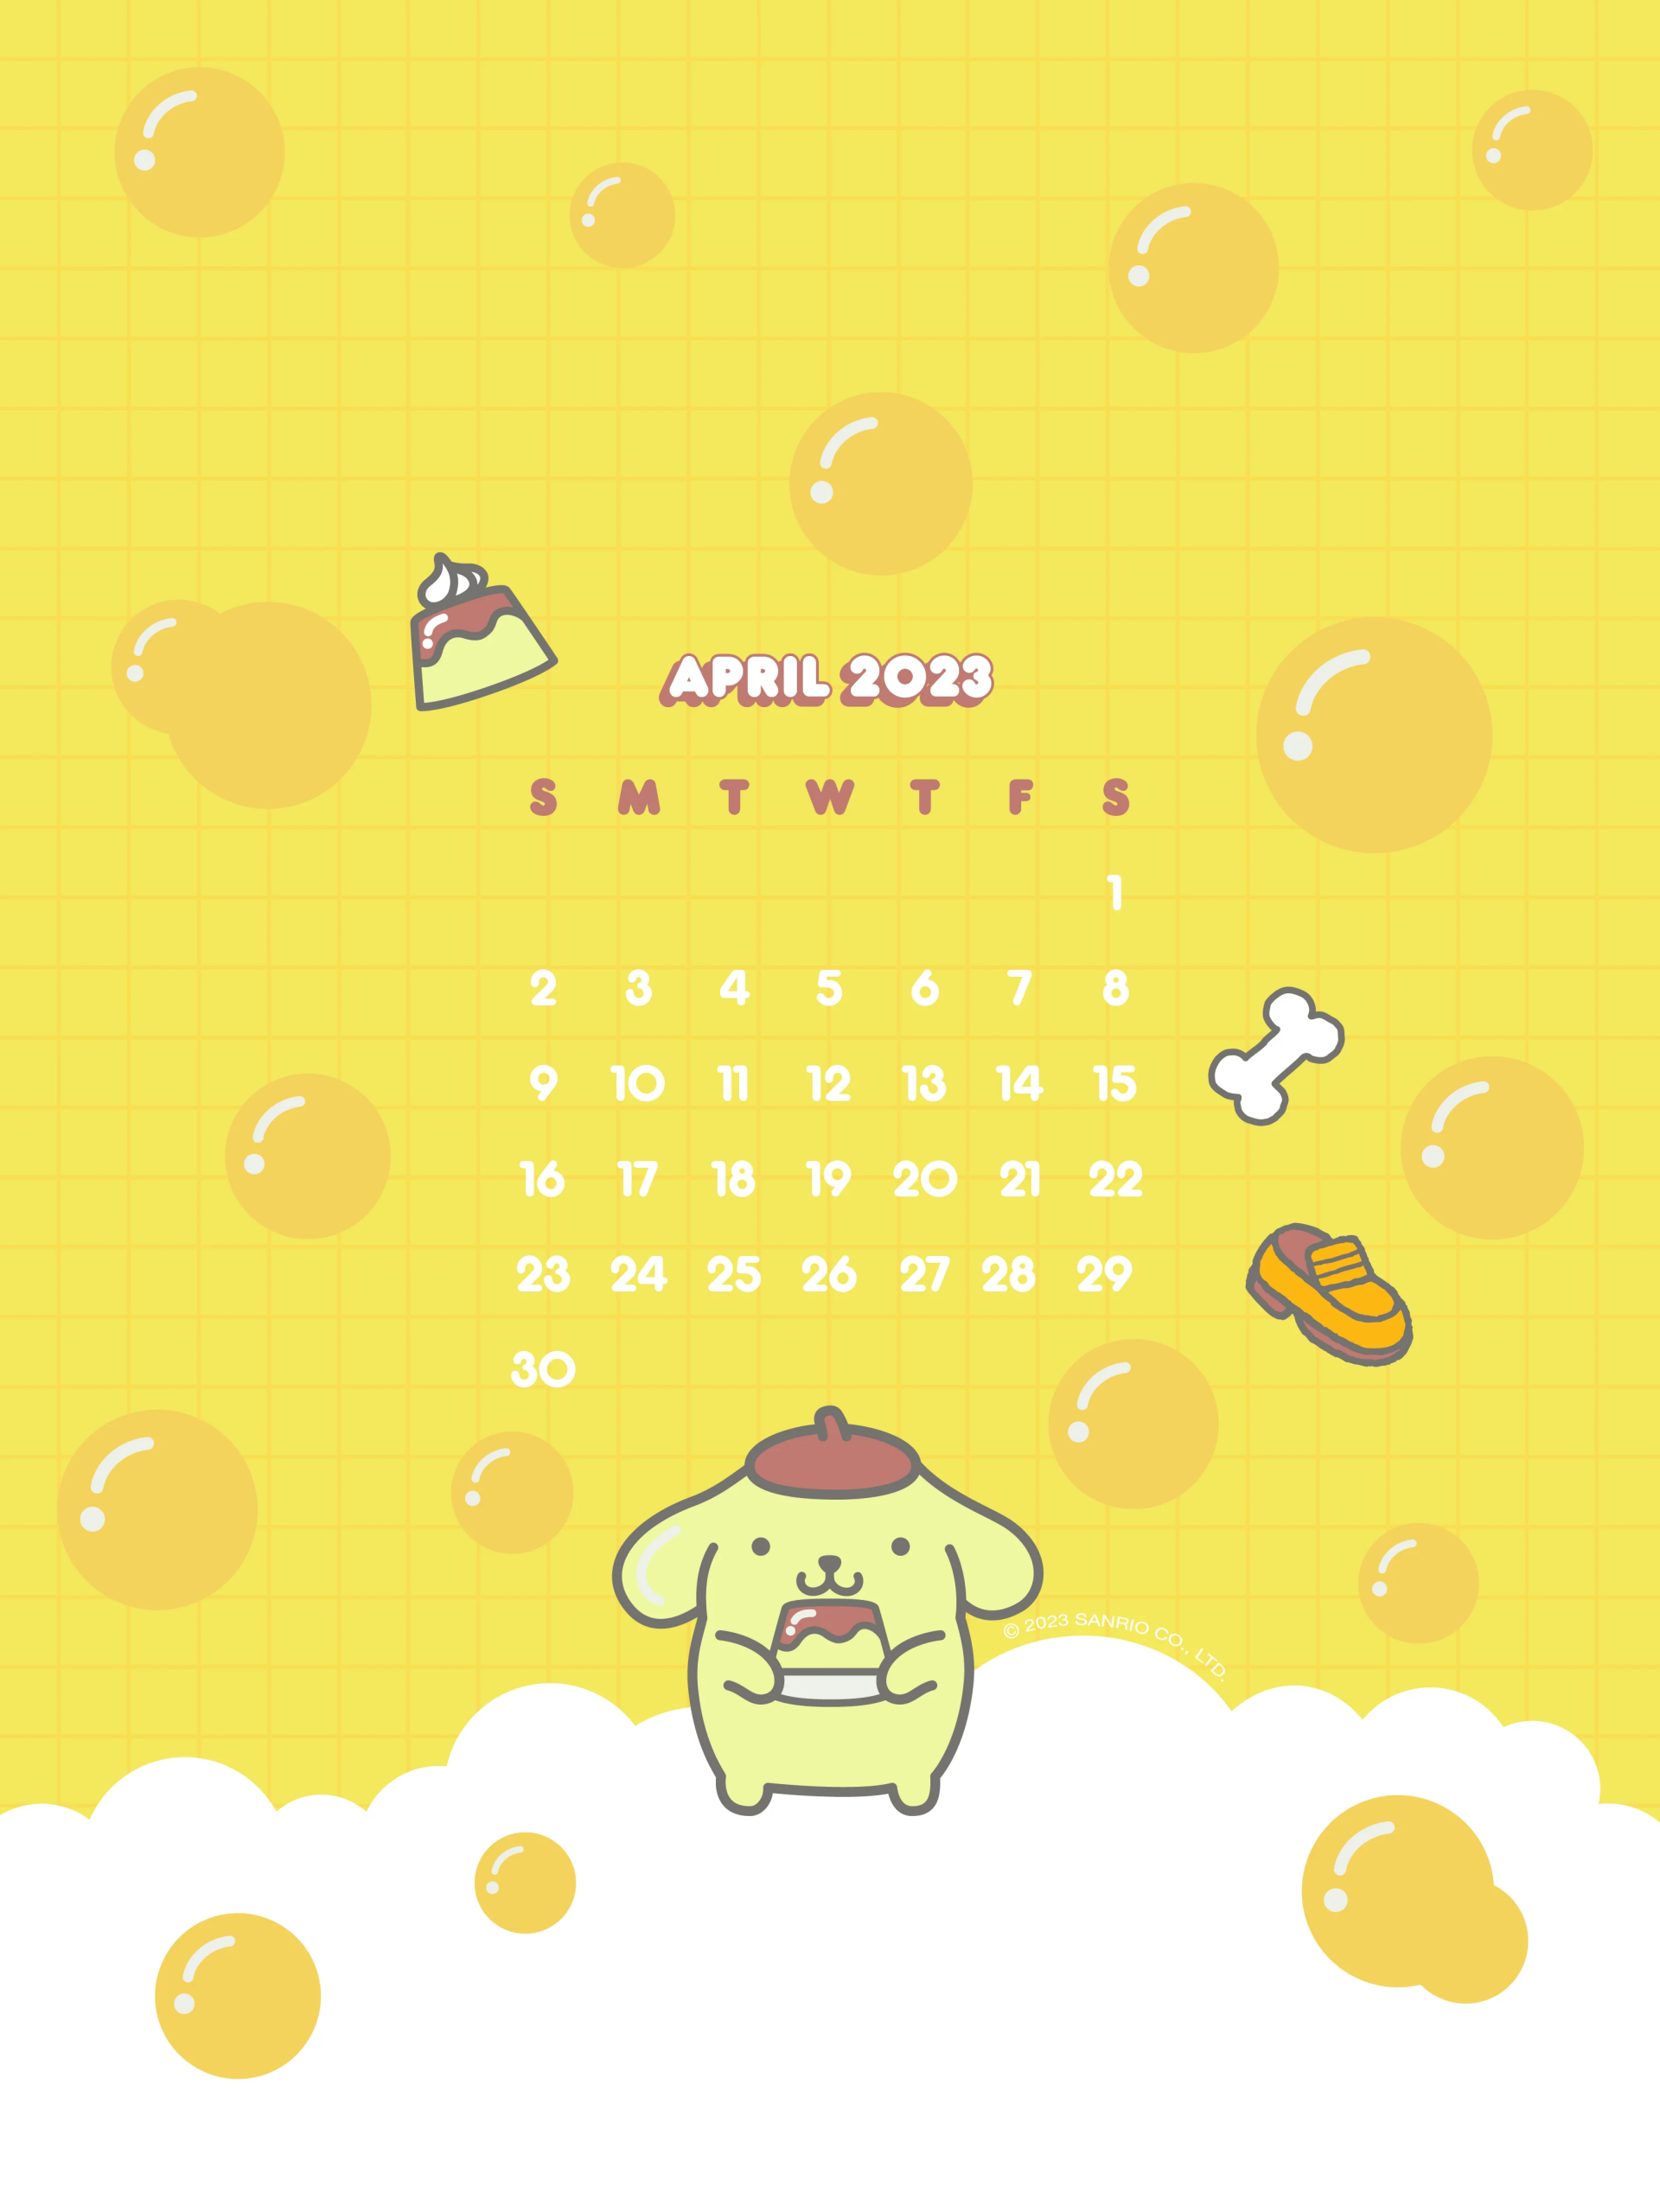 April 2023 Sanrio Pompompurin themed calendar with cute character and whimsical design elements on a yellow background.